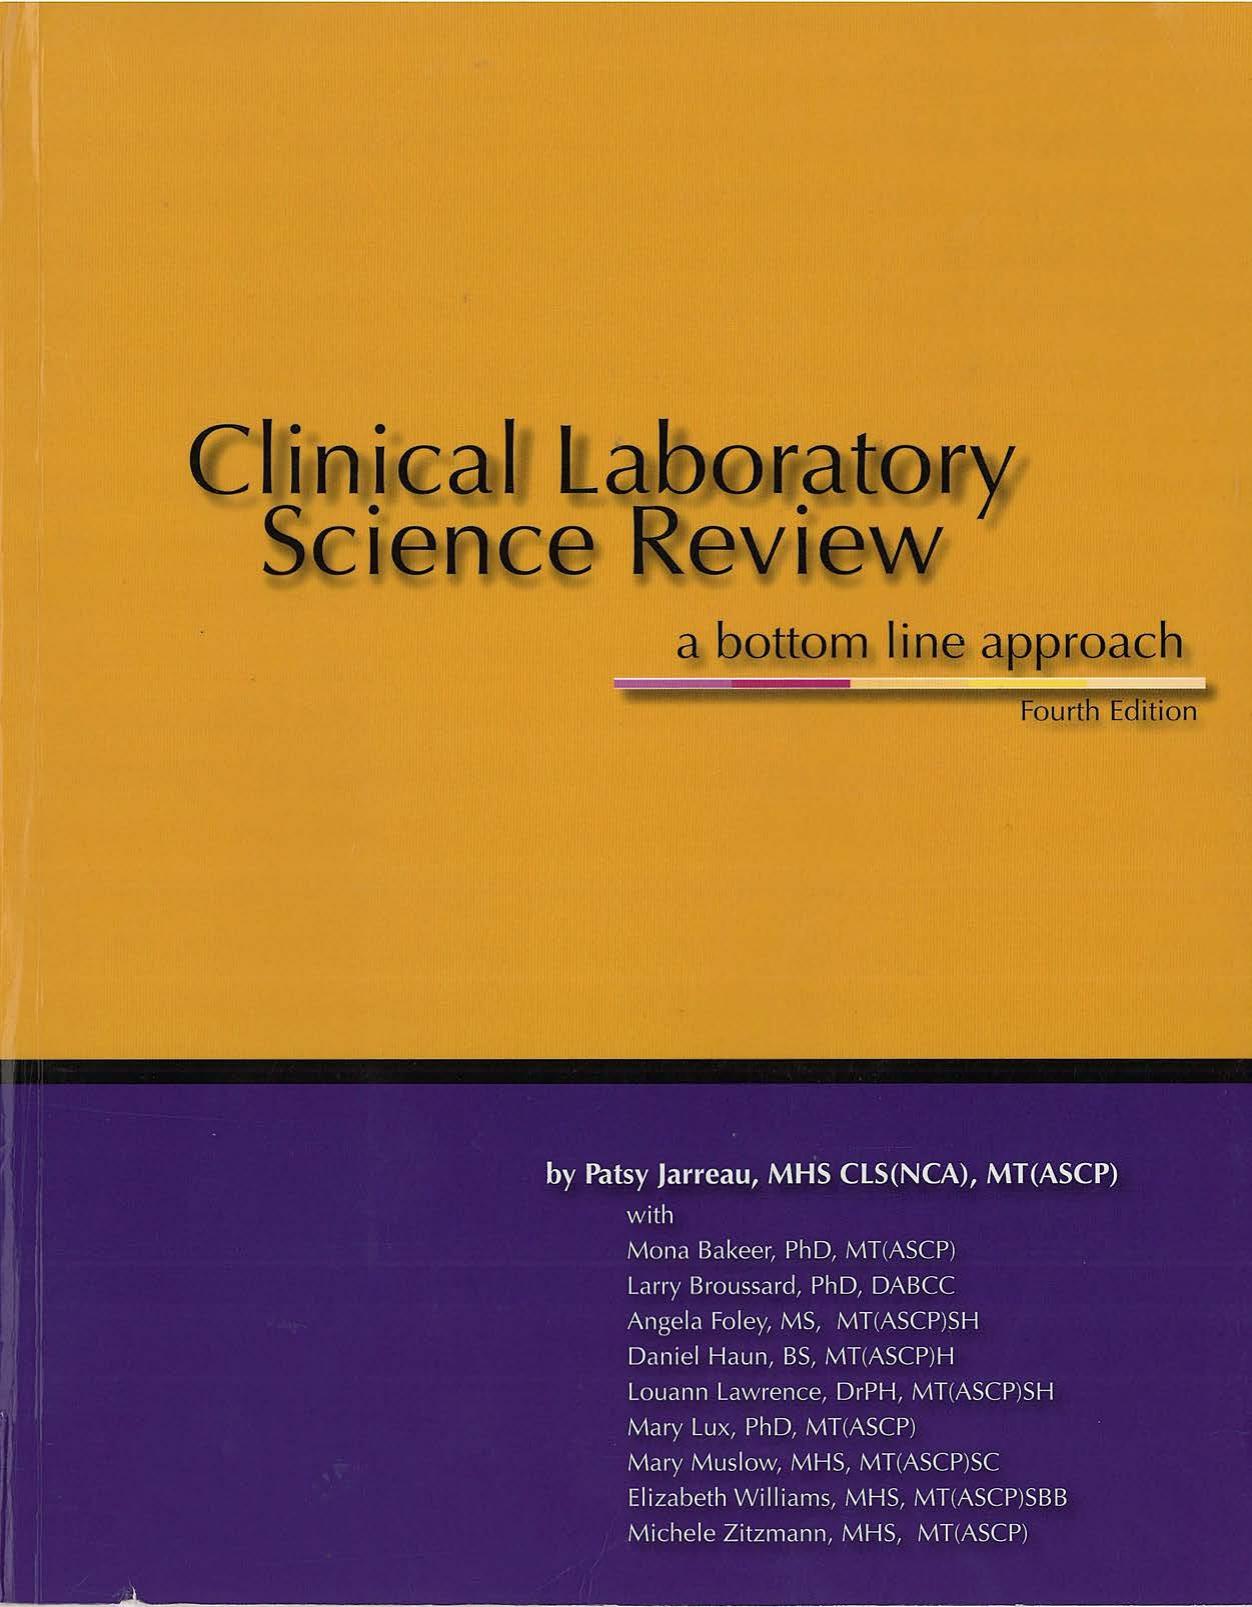 CLINICAL LAB SCIENCE REVIEW 4th ed 2011